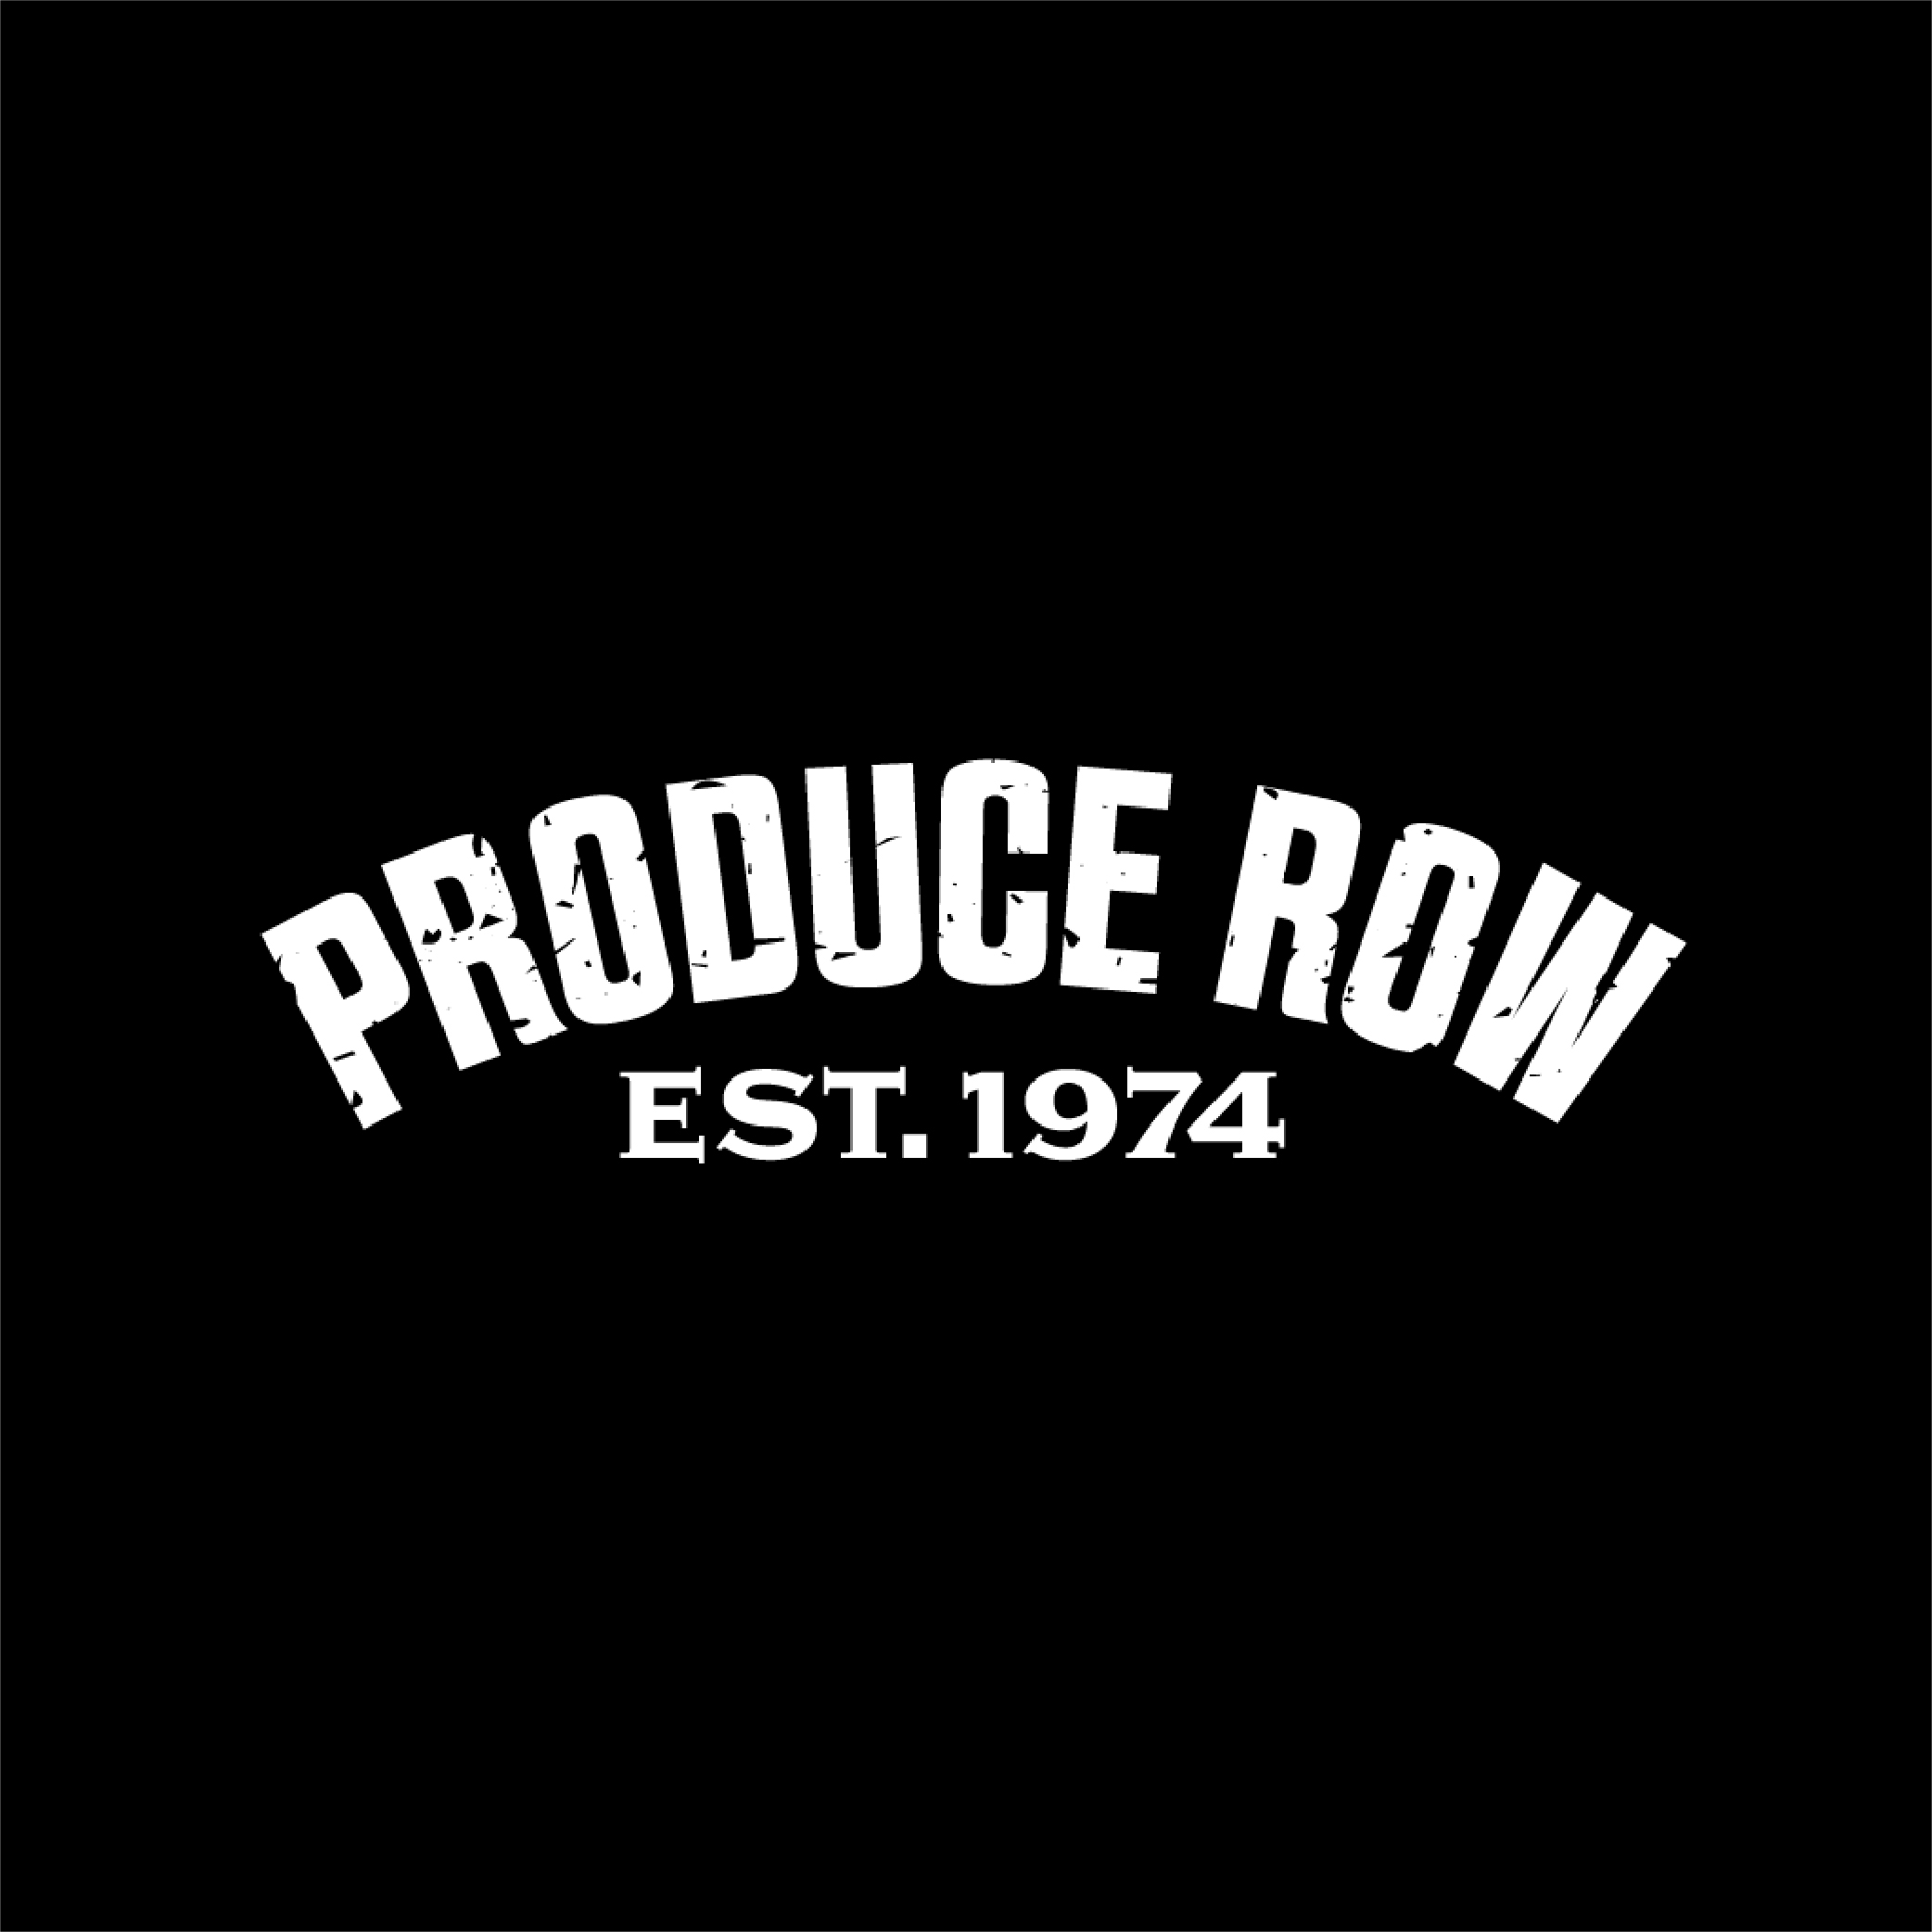 a gastropub logo with the words "Produce Row Est. 1974" in white text on a black background